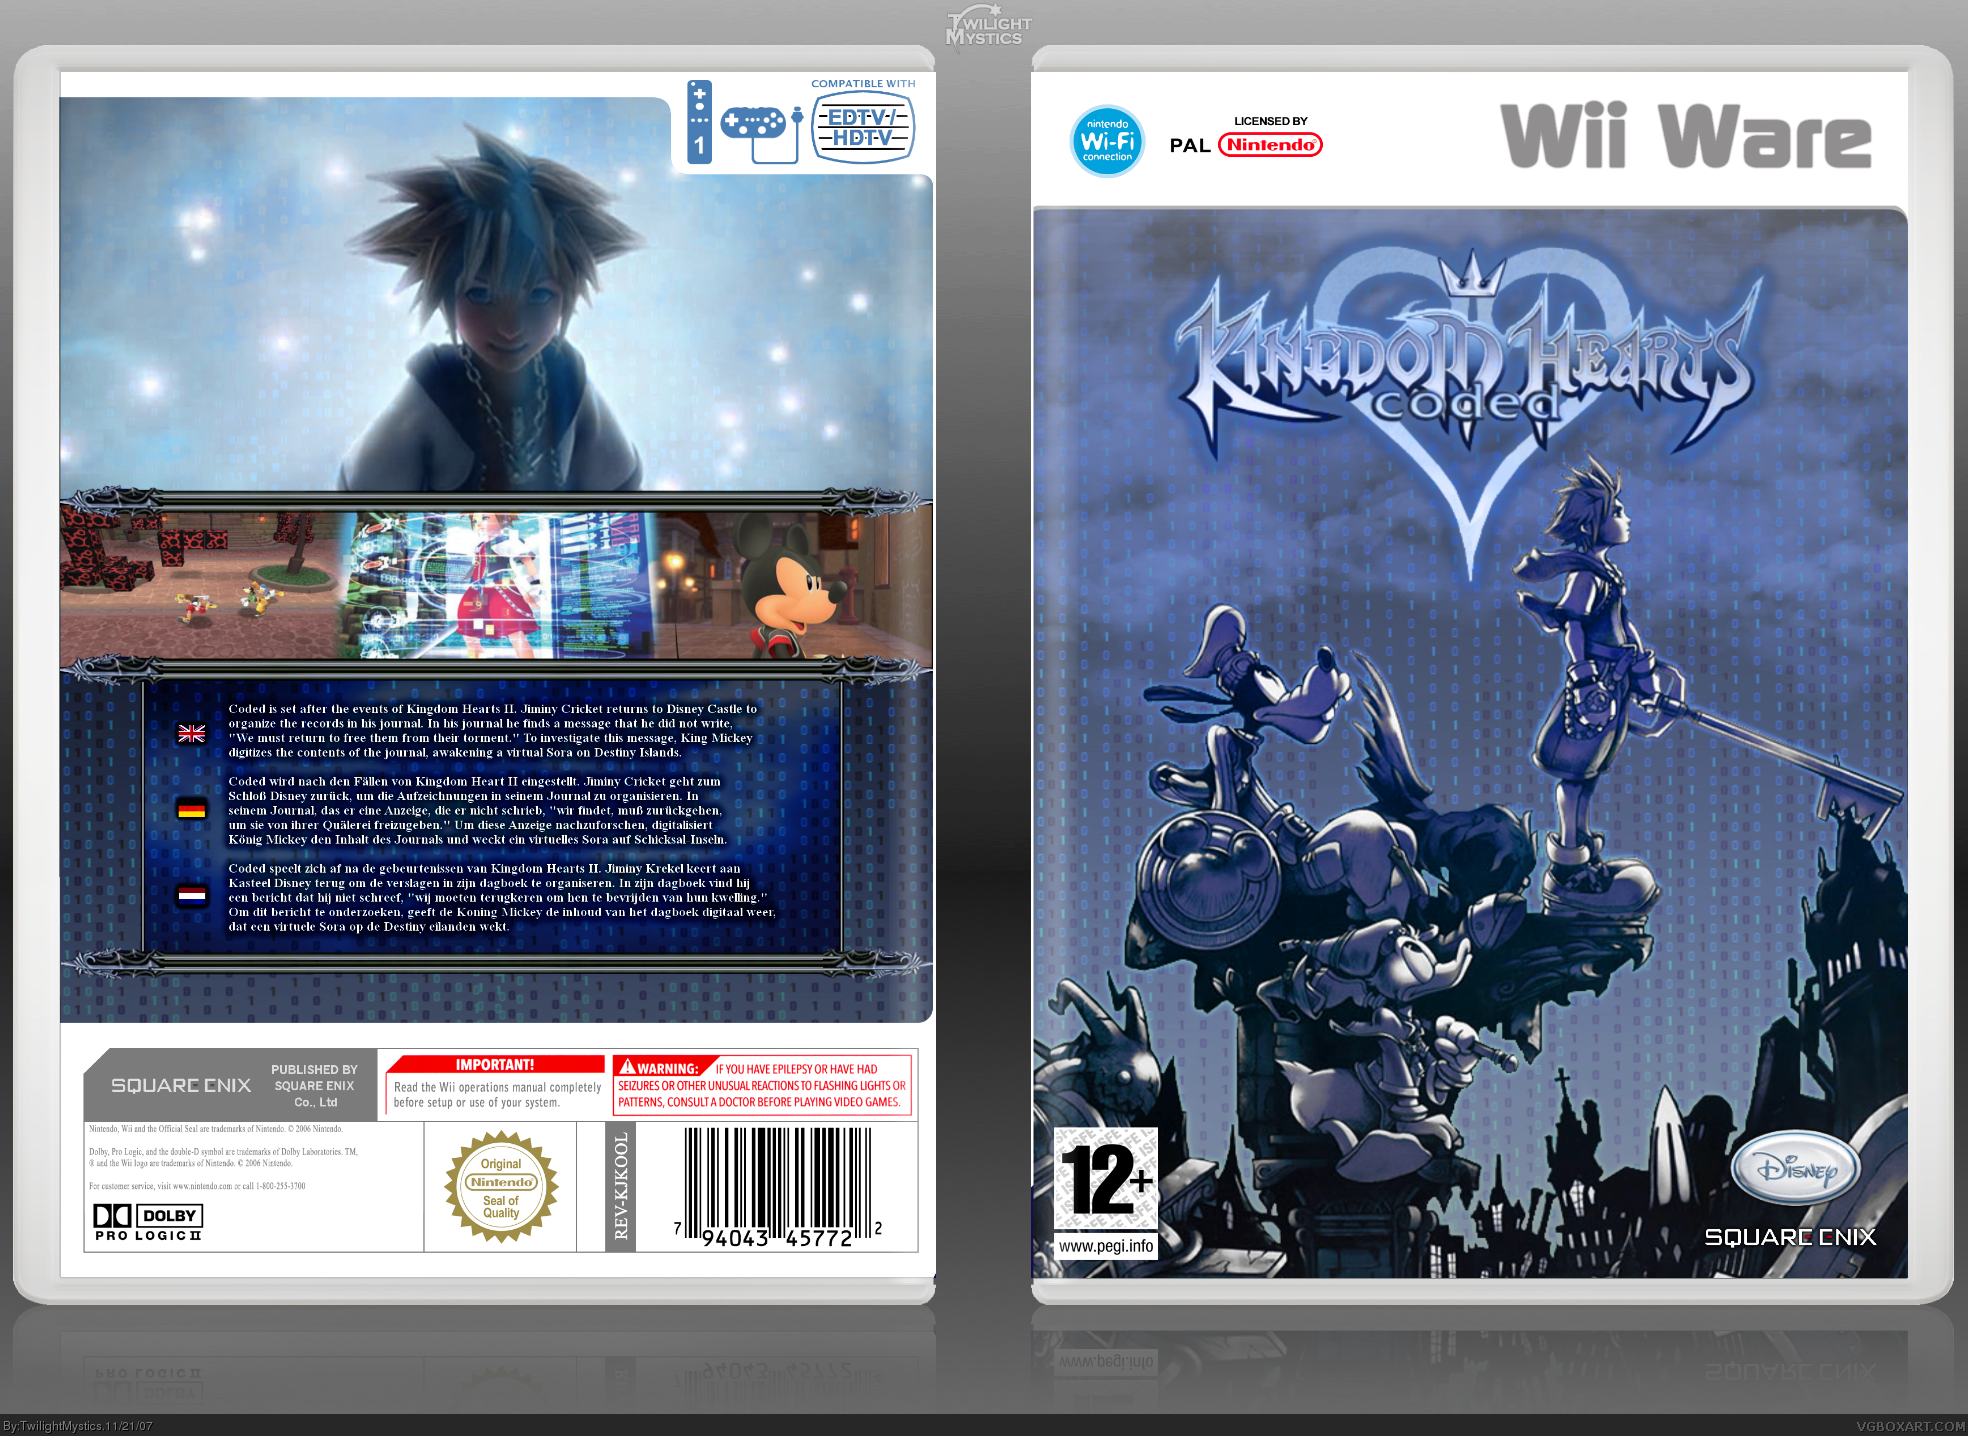 Kingdom Hearts: Coded (WiiWare Classic) box cover